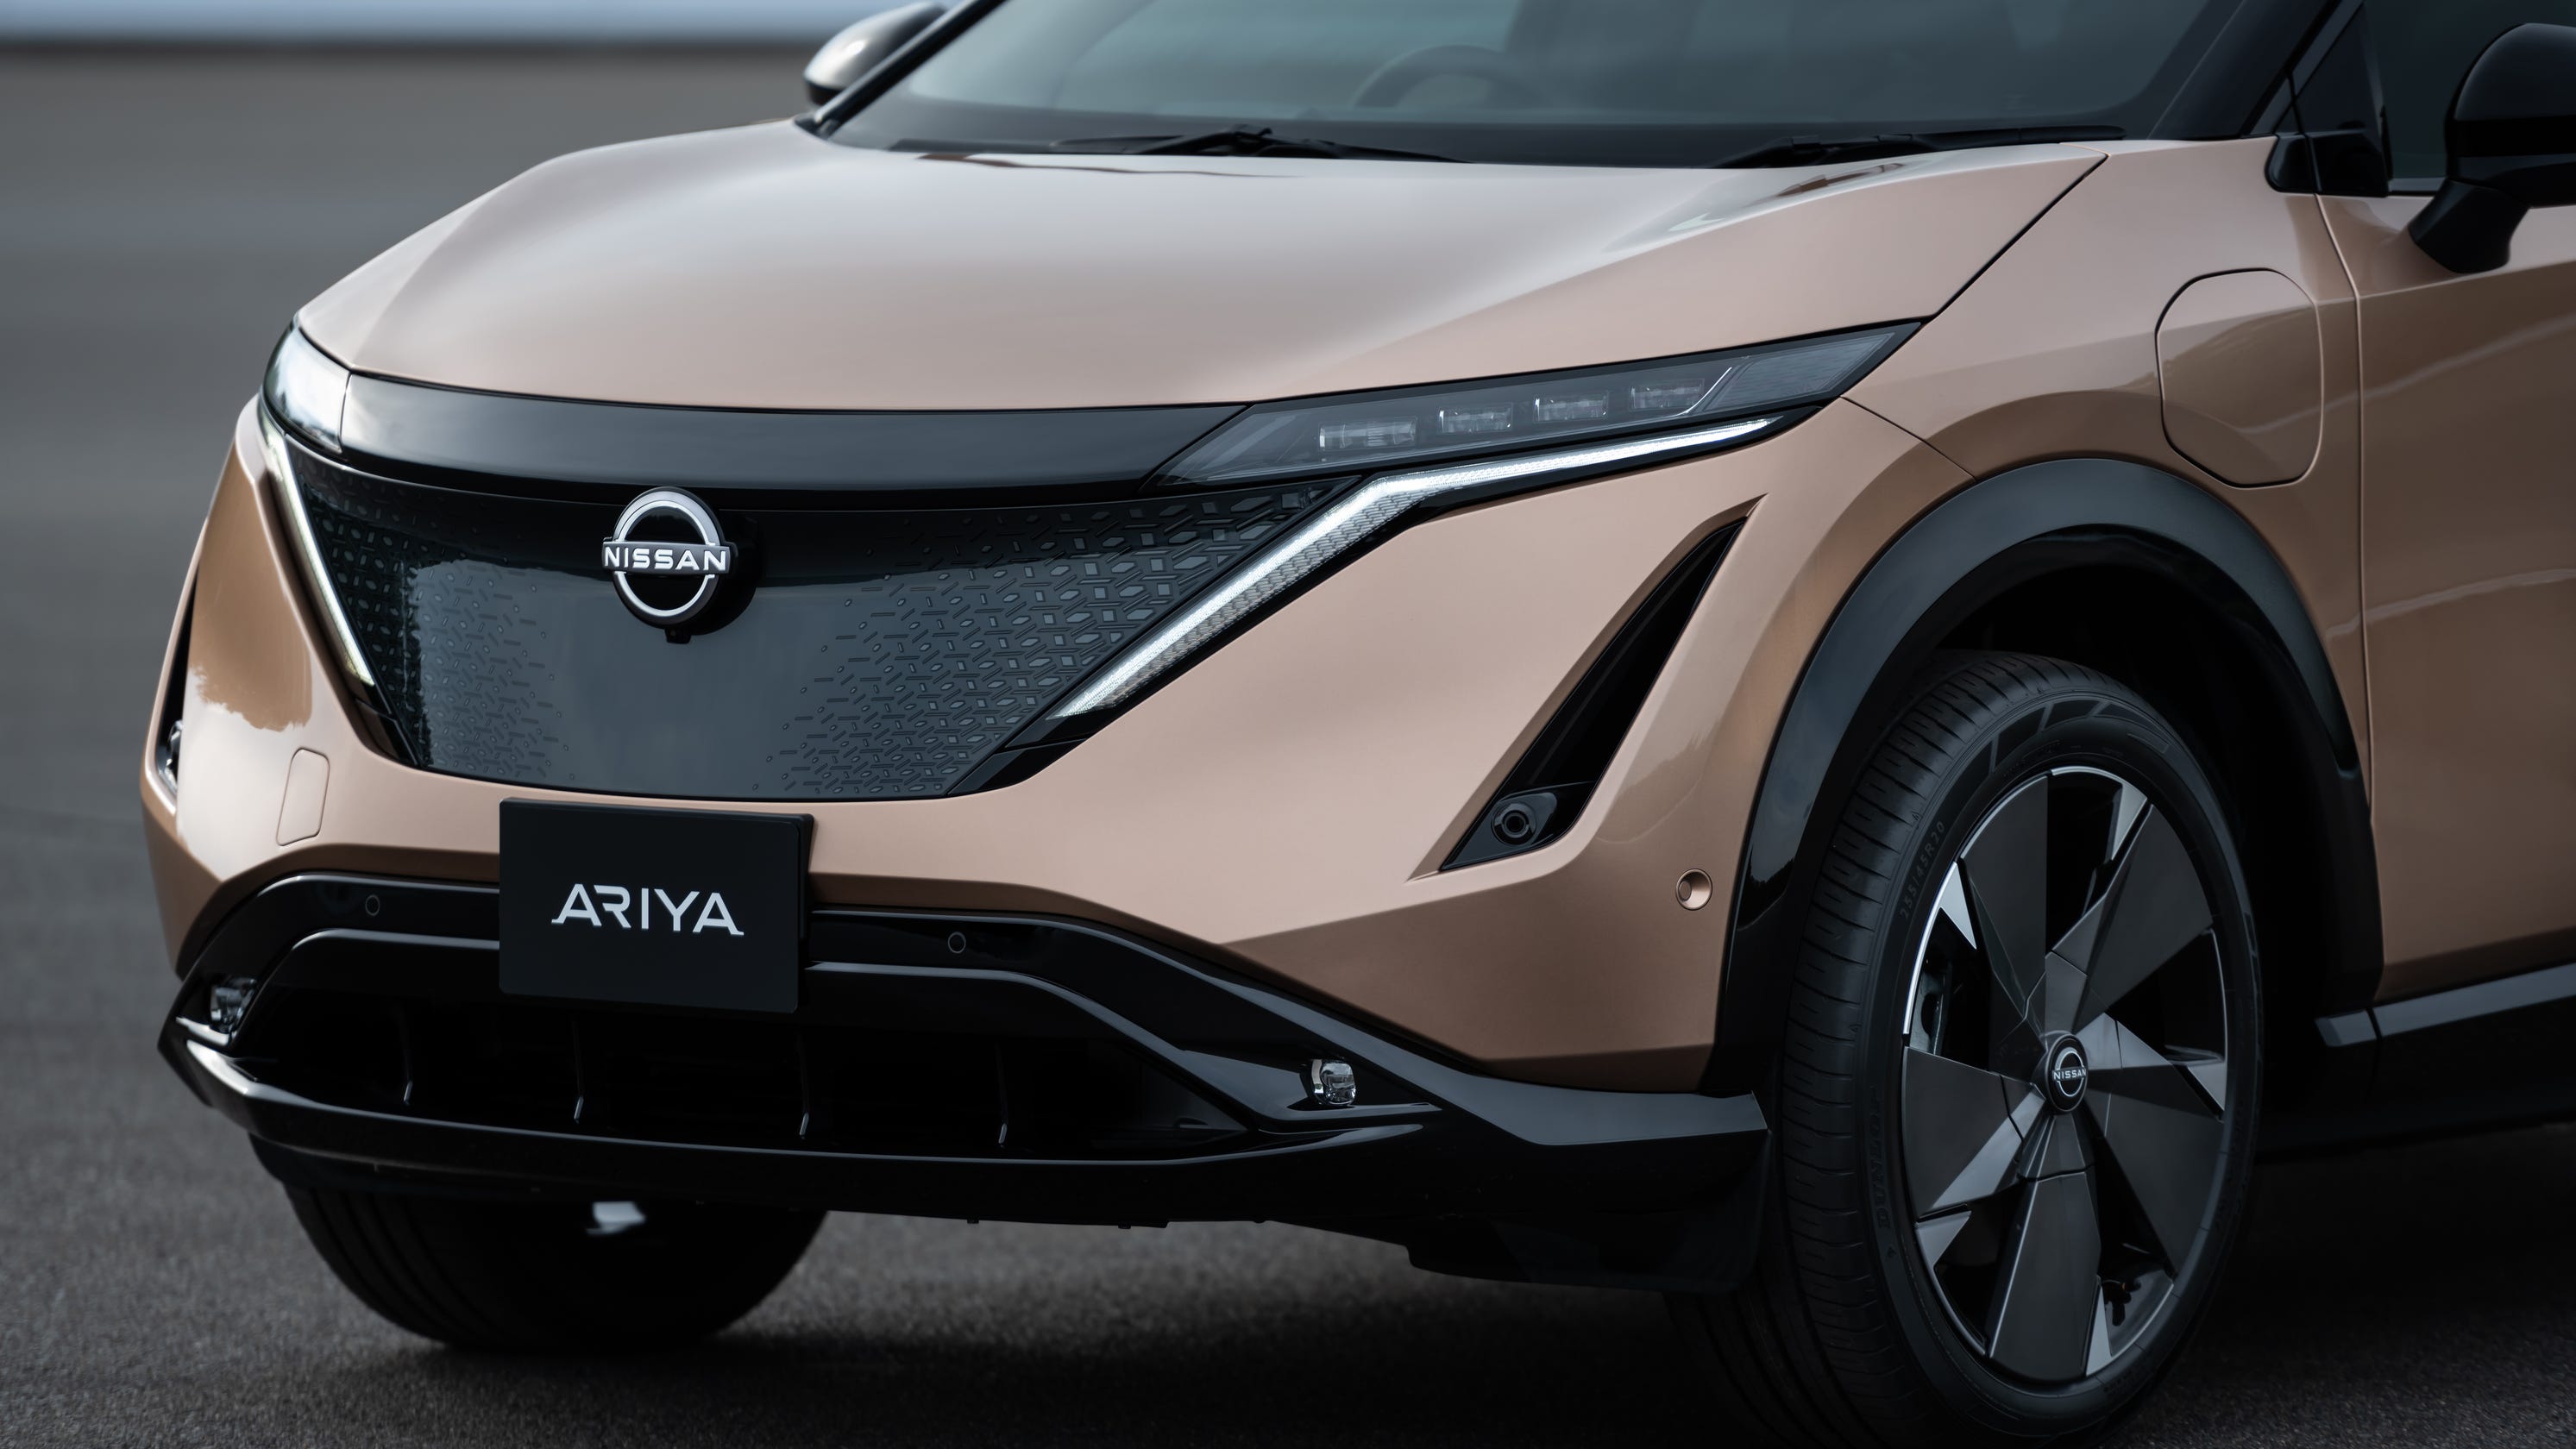 Nissan on Wednesday revealed the Nissan Ariya, a $40,000 SUV with up to 300 miles of range. It is expected to hit the U.S. in the second half of 2021.